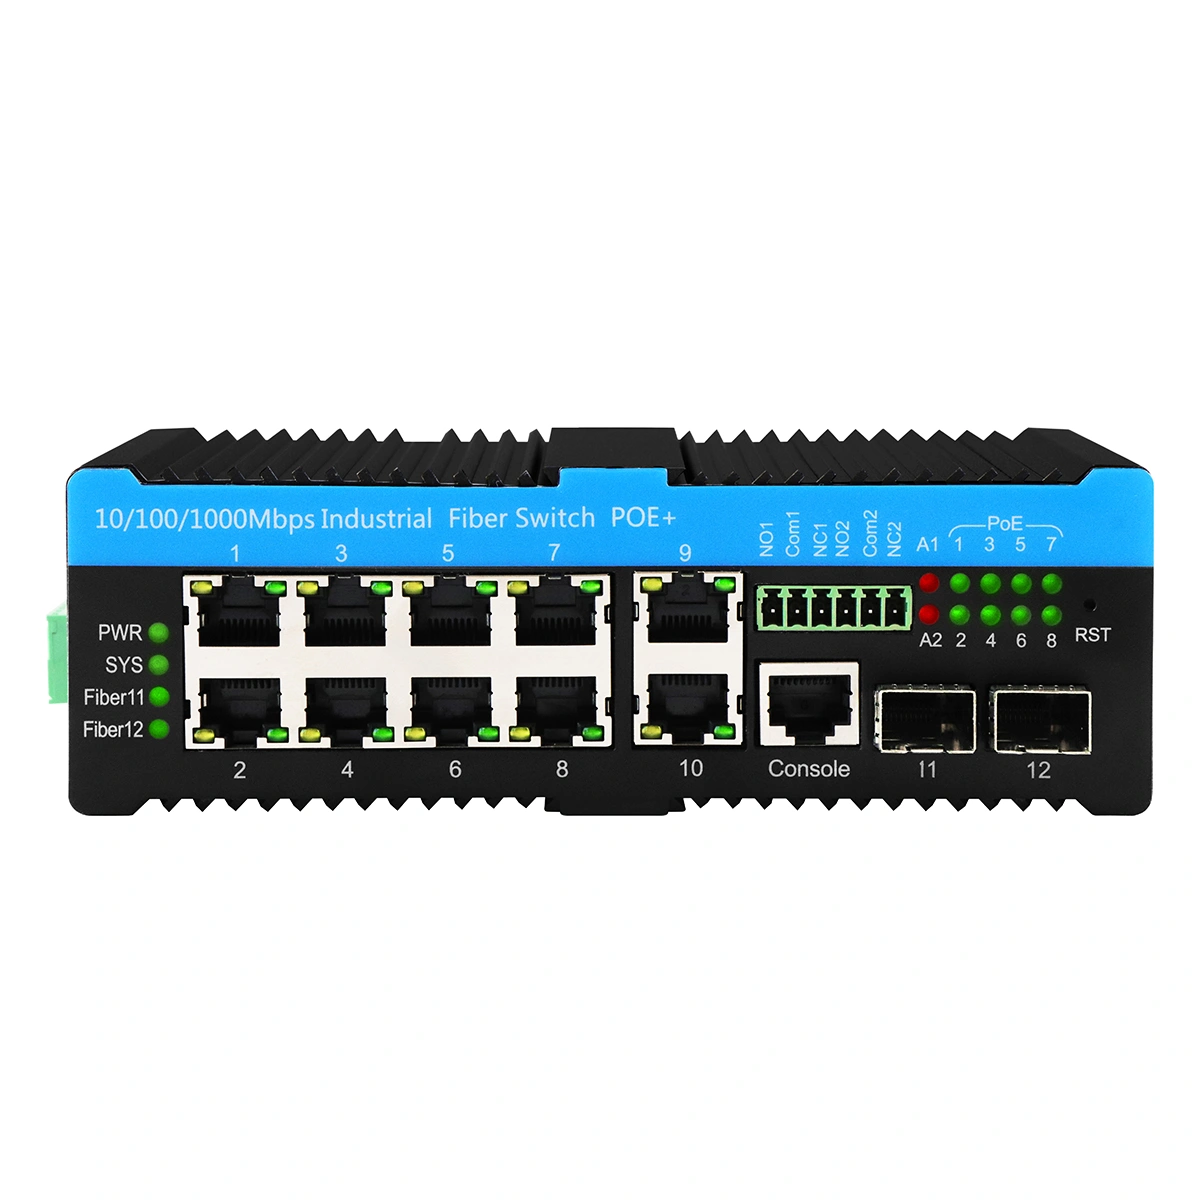 What is a industrail fiber switch?